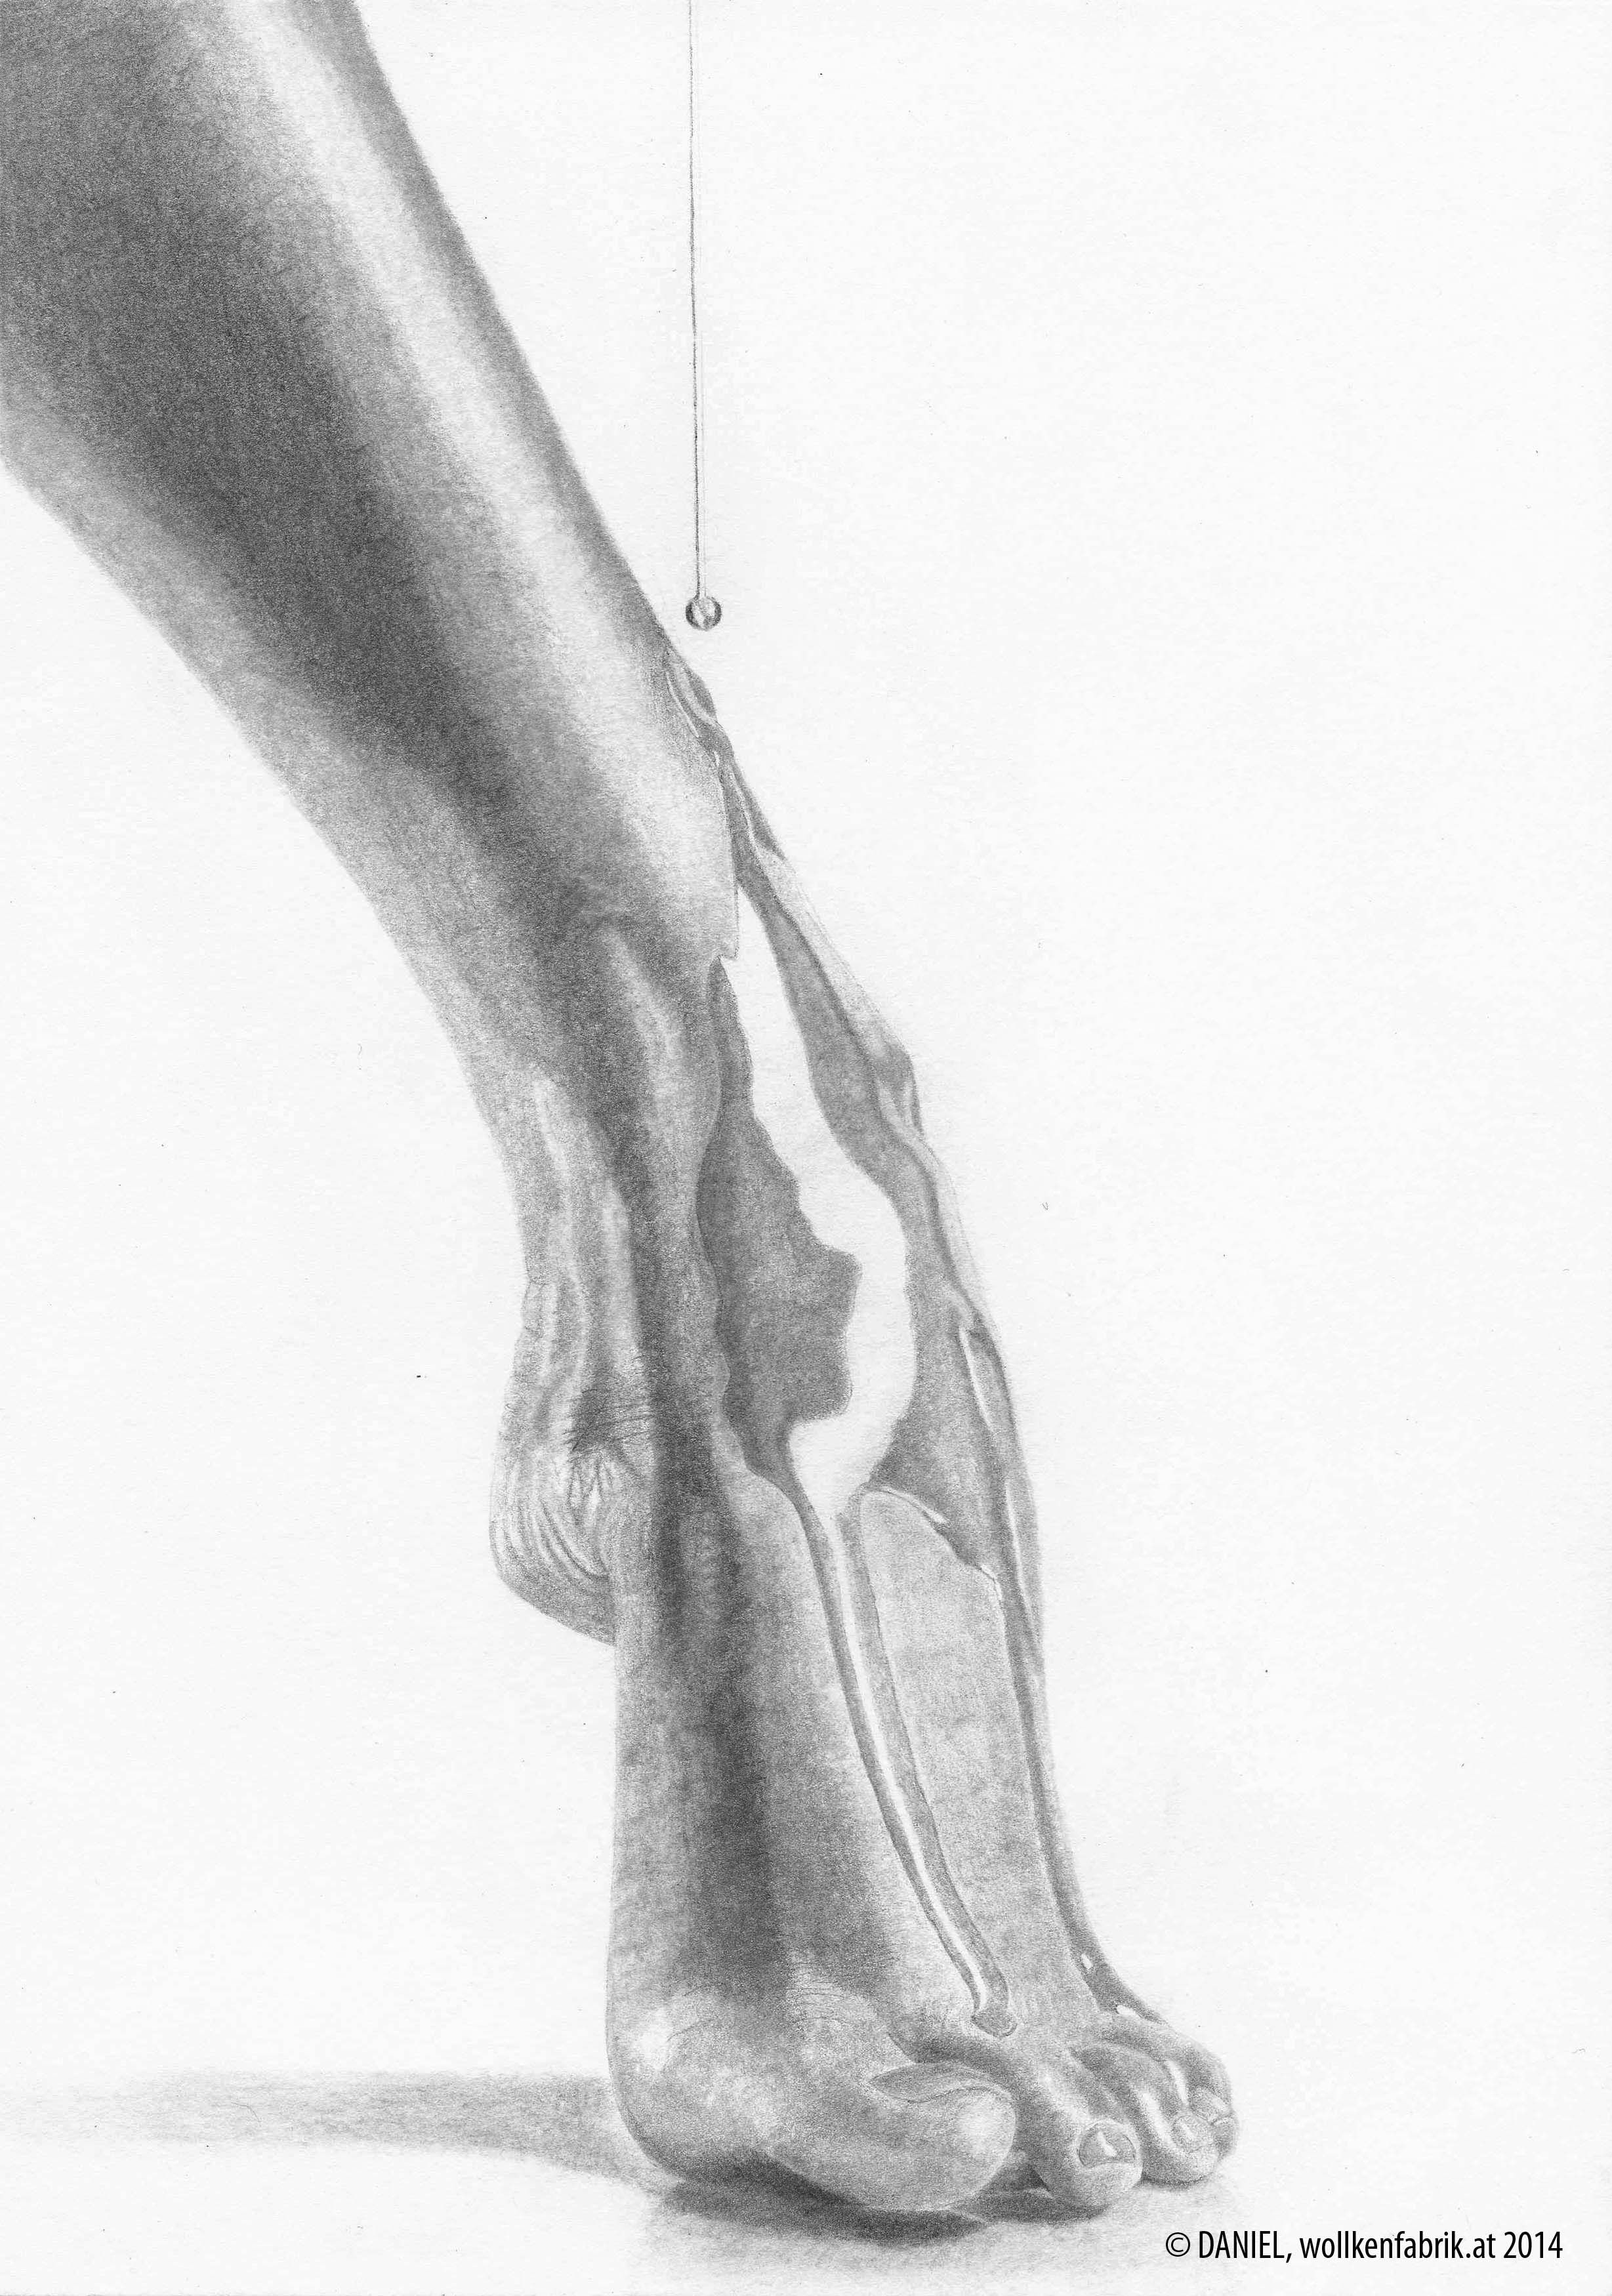 Oil on leg, hand drawing pencil on paper